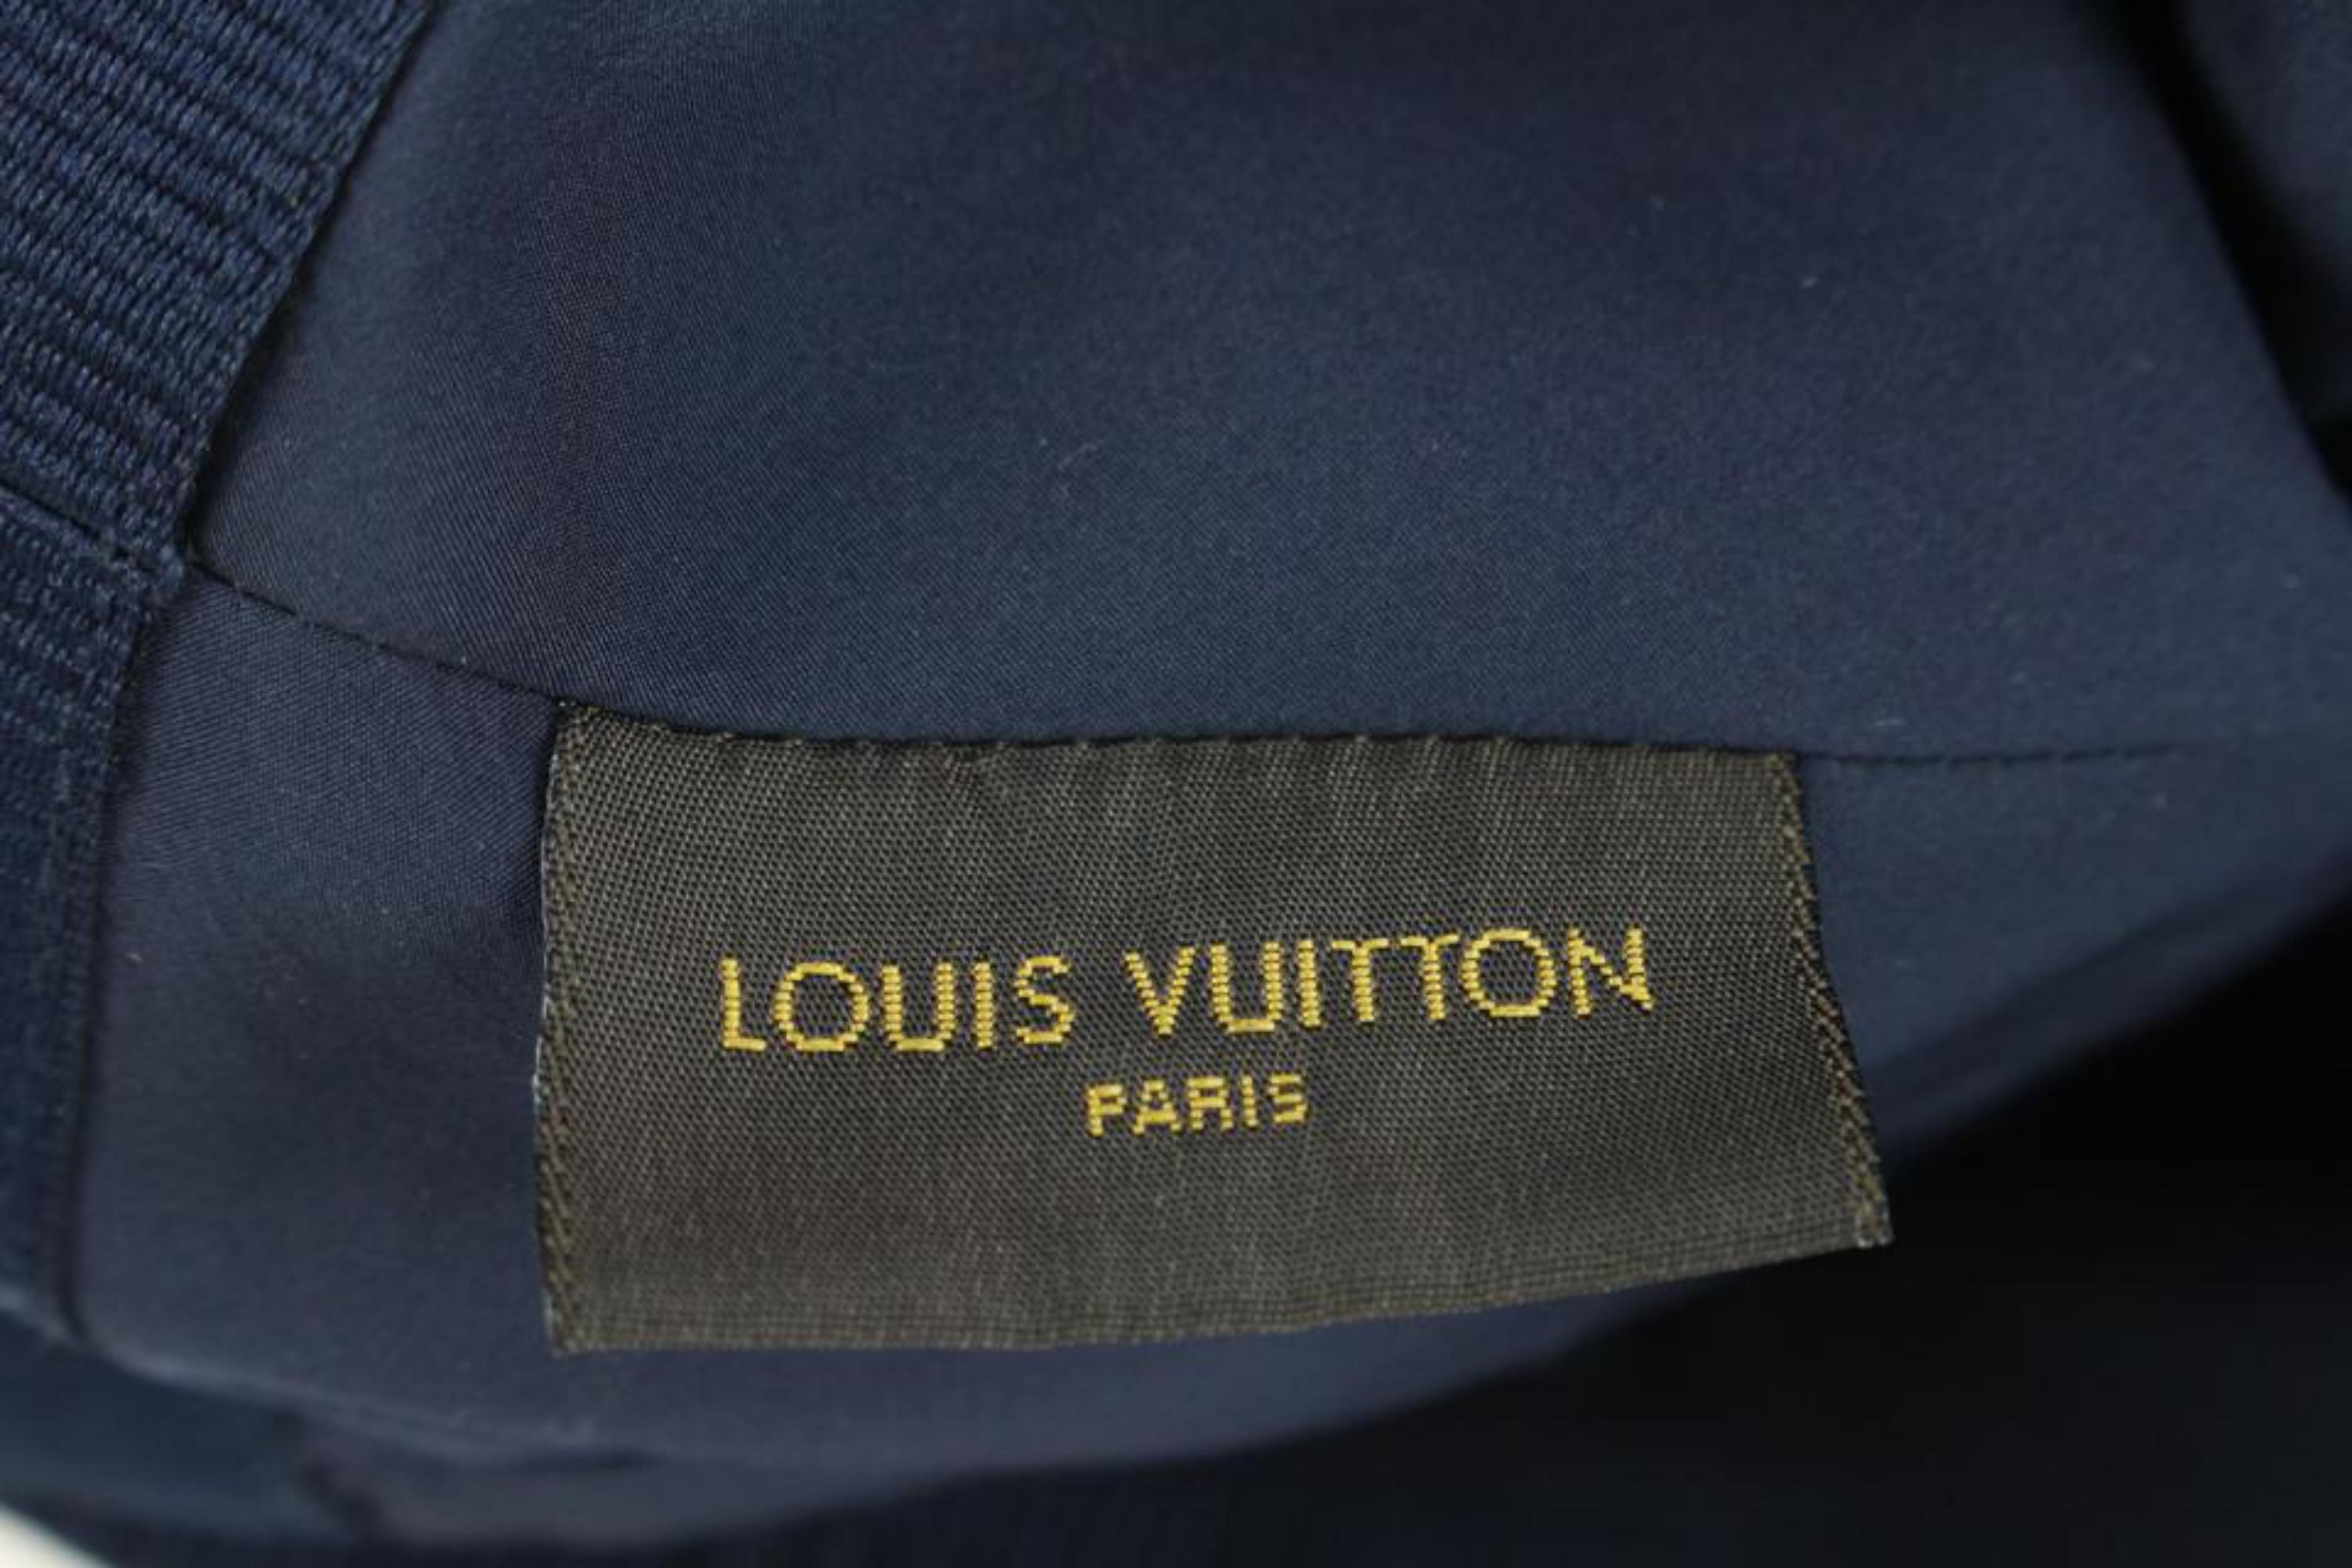 Louis Vuitton Navy 2017 LV America's Cup Hat 3lk59s For Sale 4